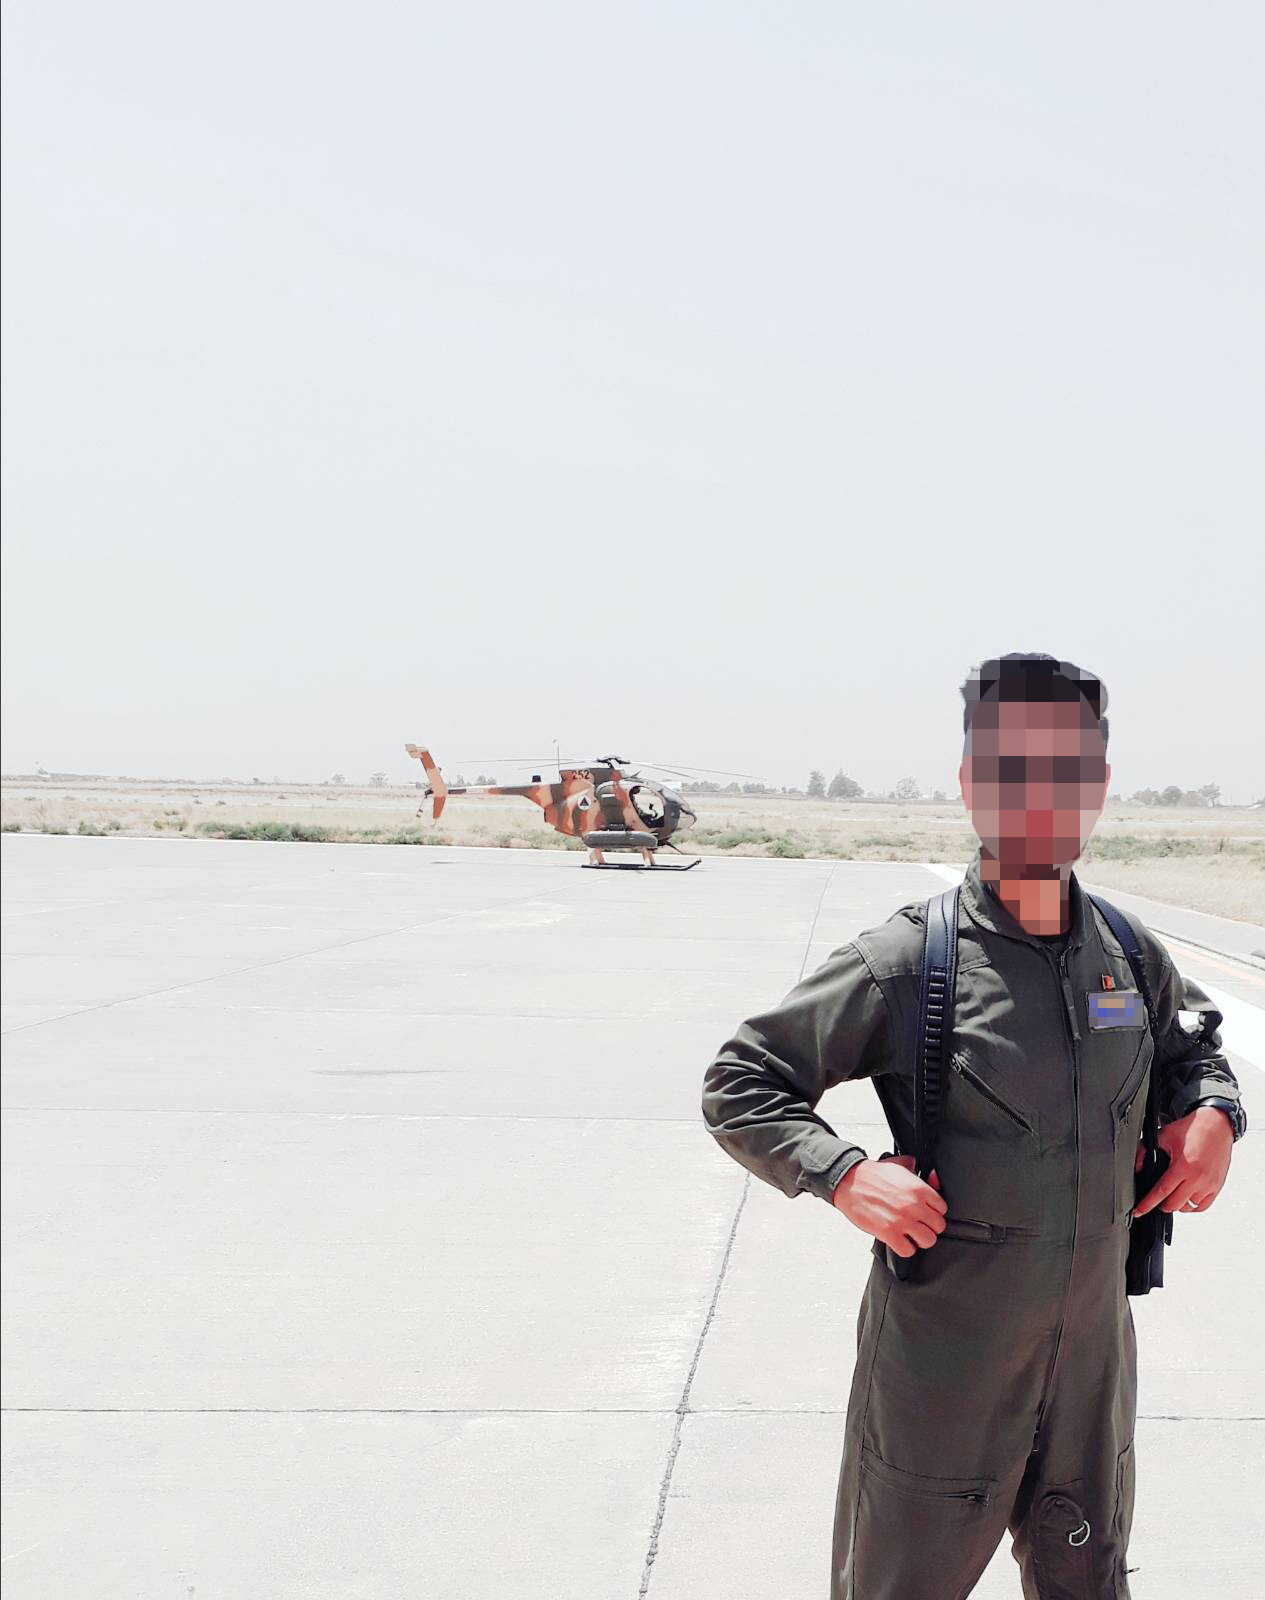 PHOTO: One of the pilots stands at an airfield in Afghanistan, with a helicopter in the background.